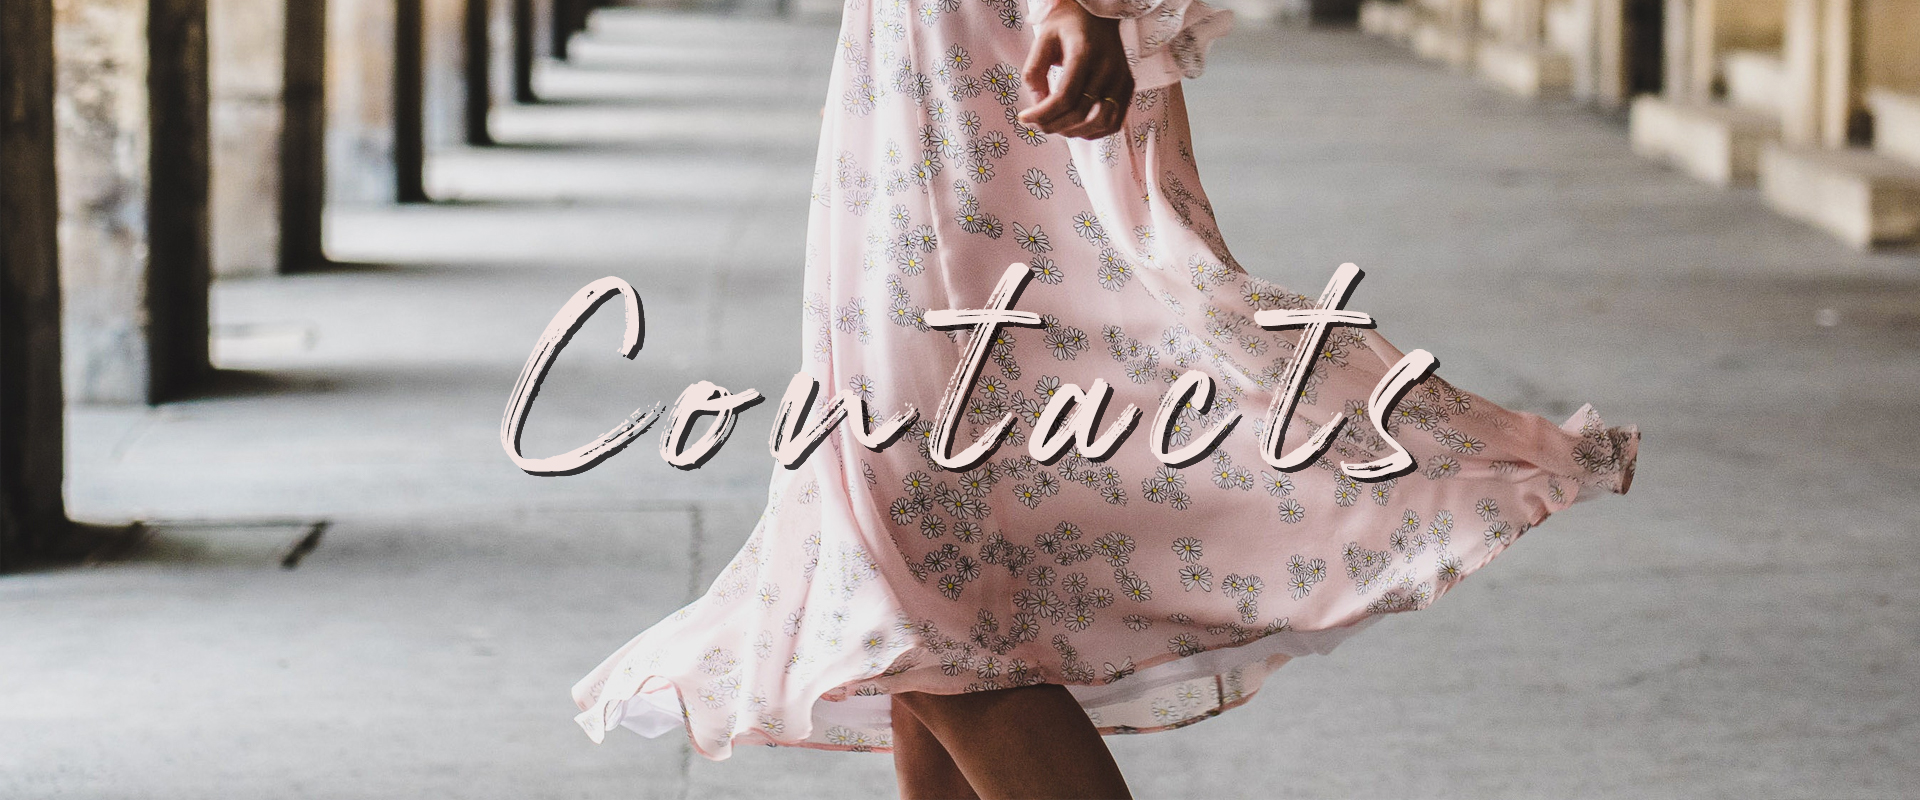 Contacts fashion without limits